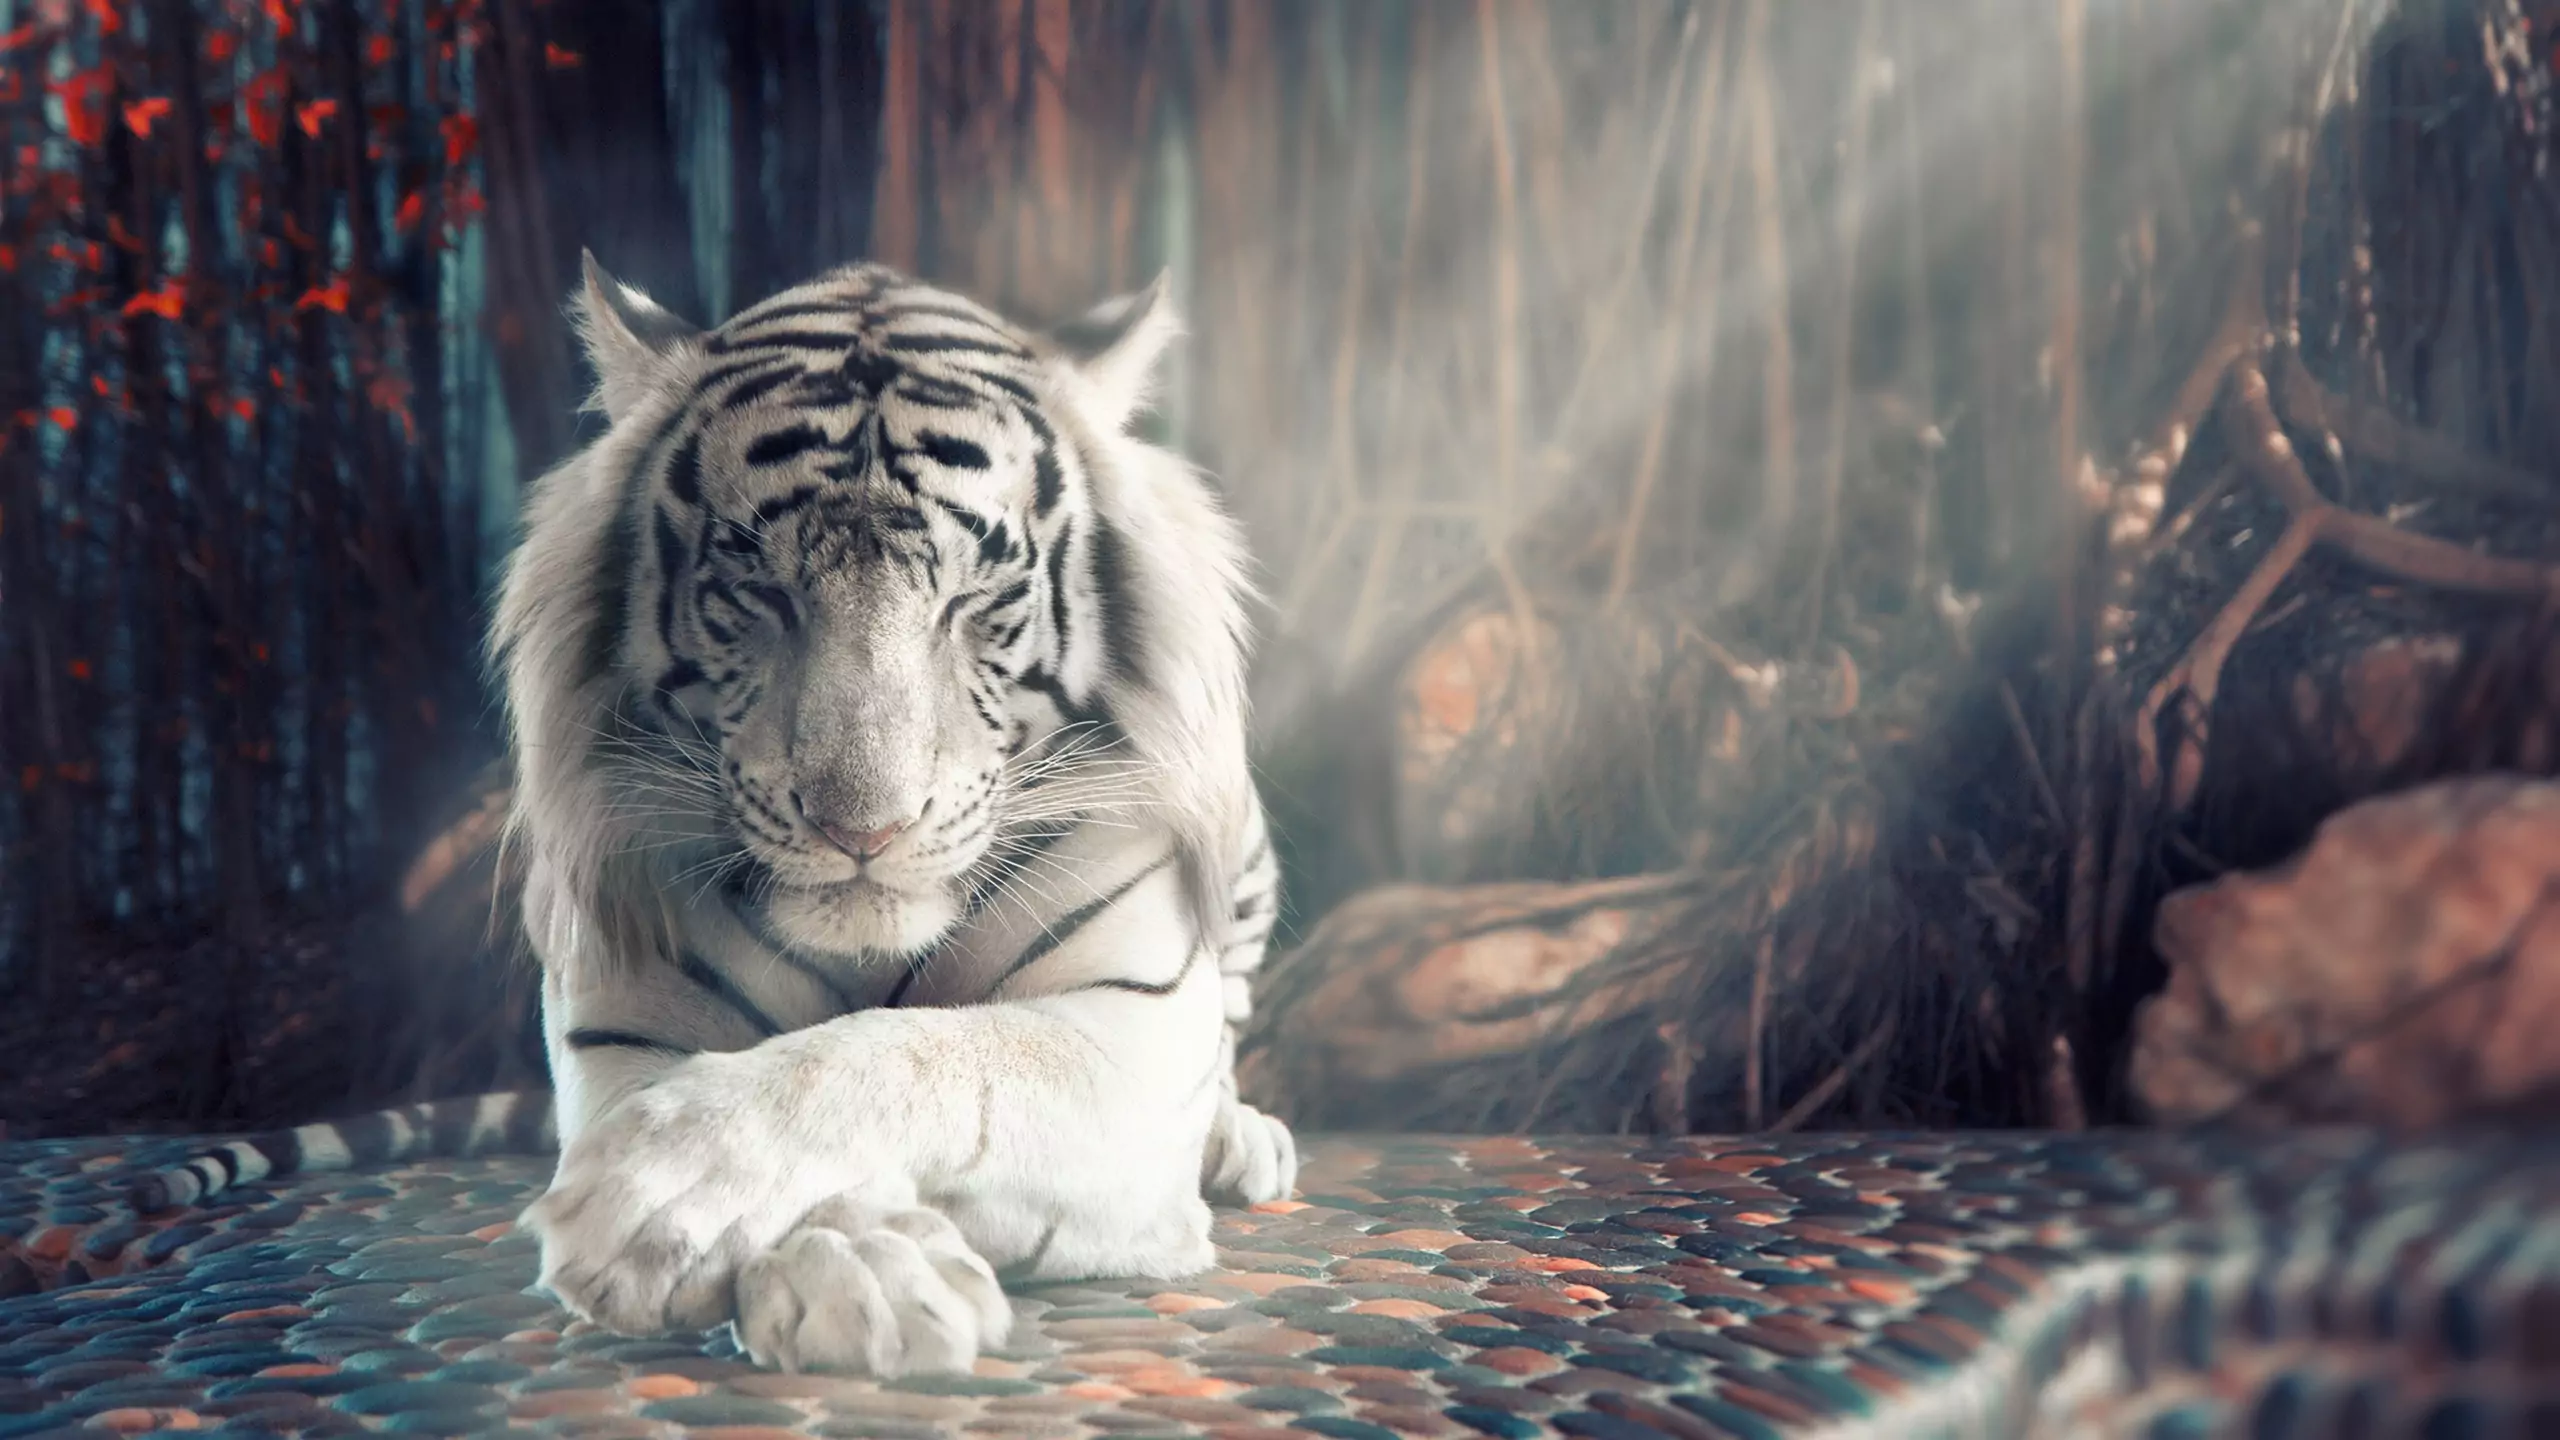 Escape From a Tiger Dream: What It Means & How To Interpret It